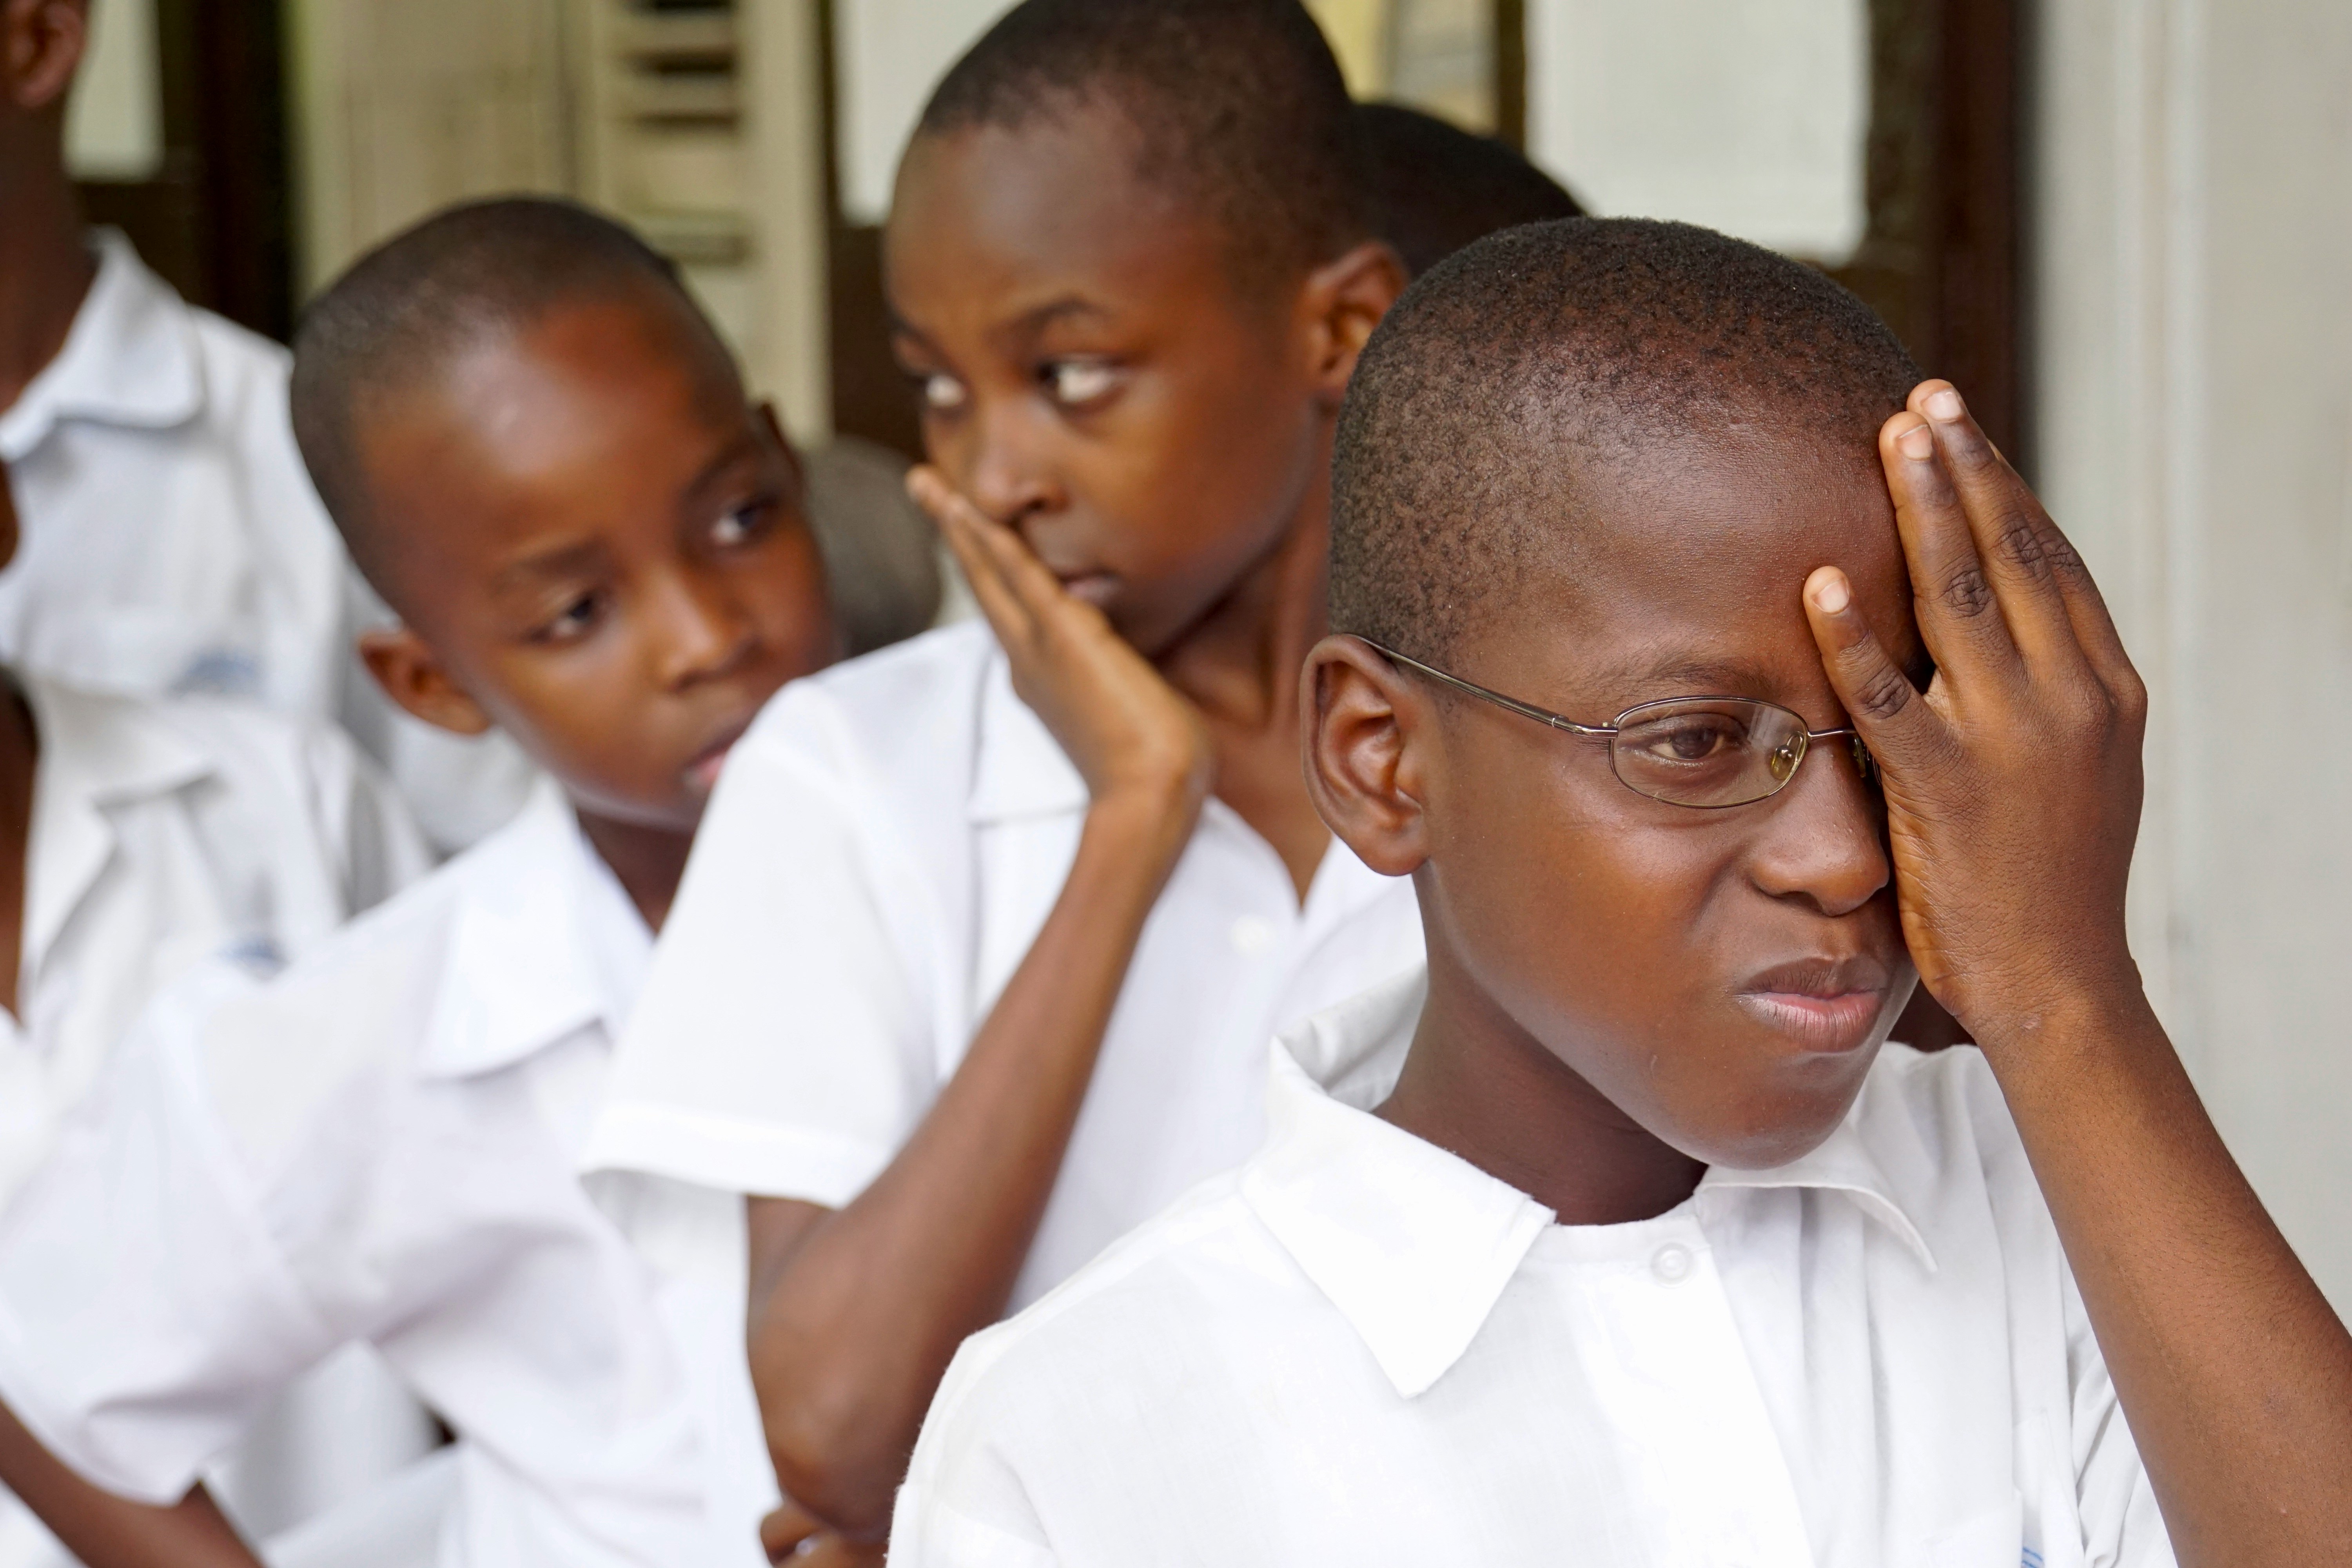 Haitian children lining up for an eye exam. Those that needed it received glasses.